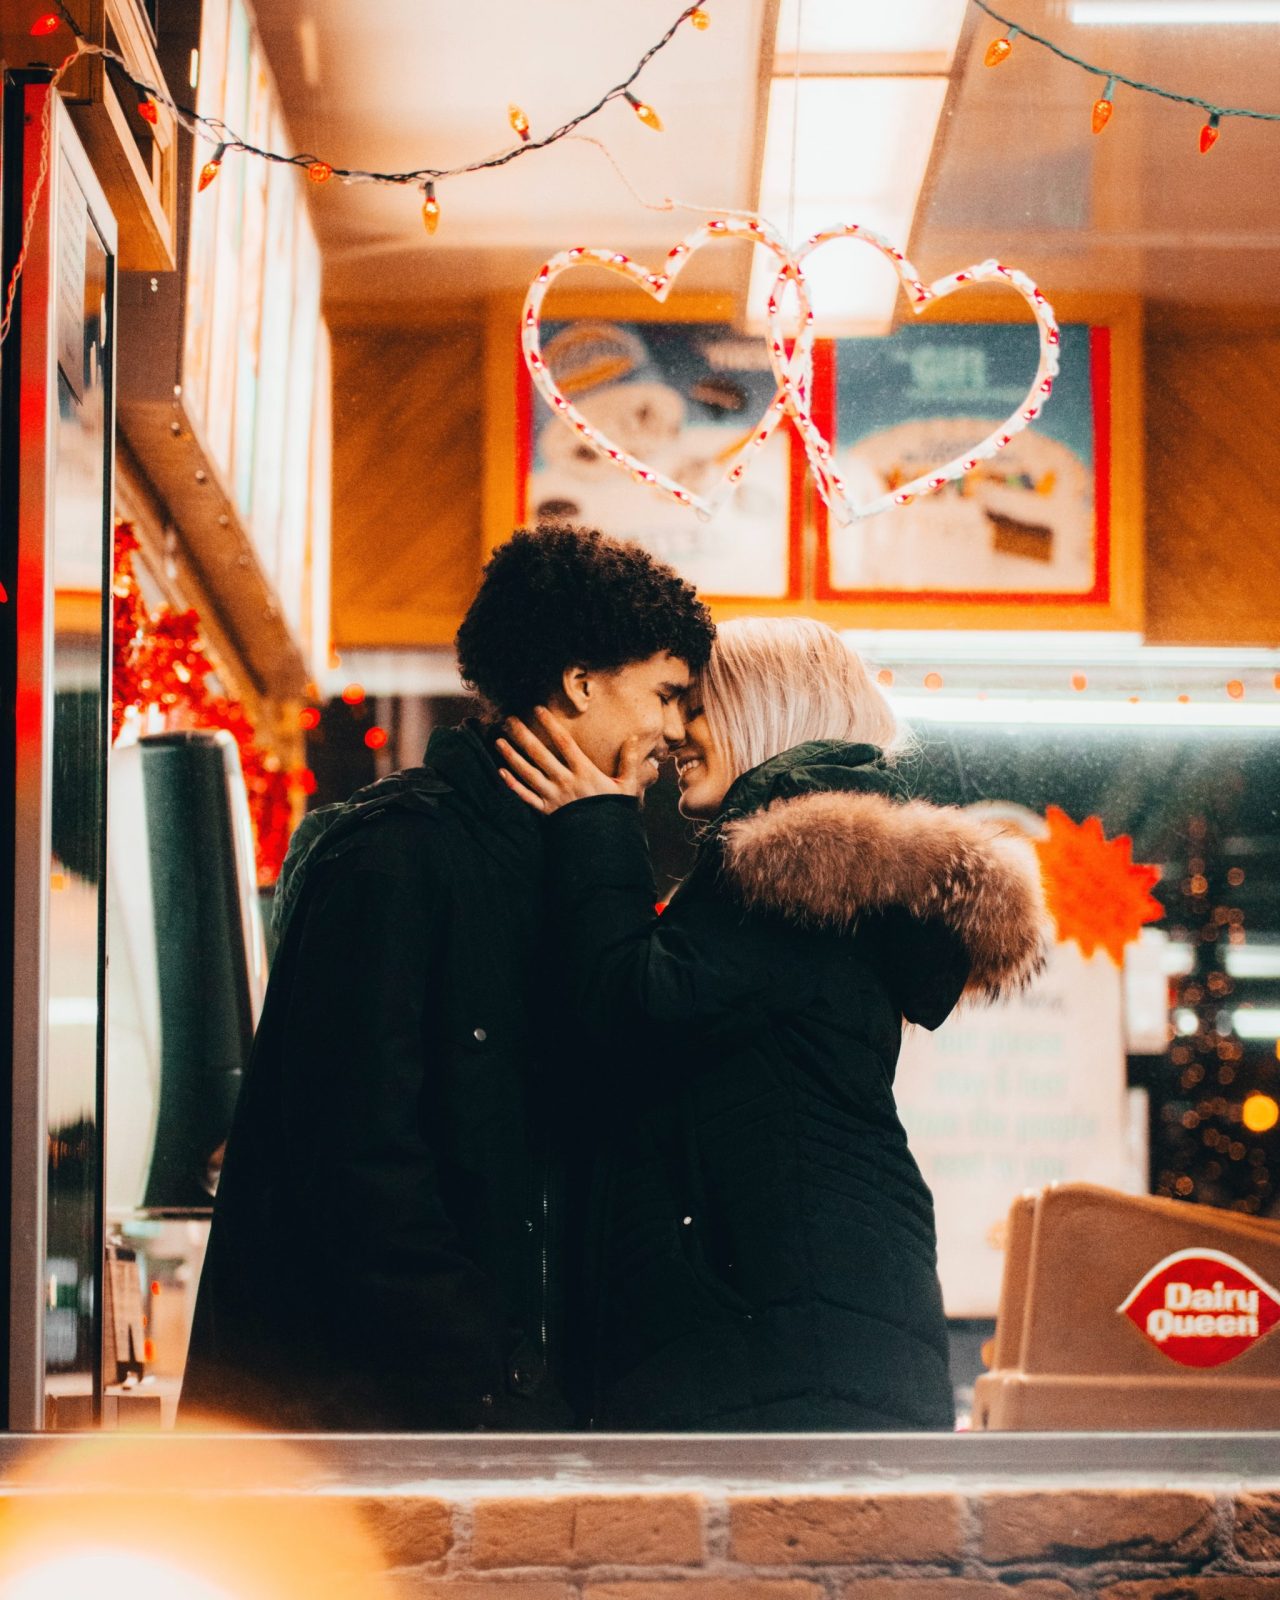 6 Unspoken Promises Your Person Should Make If They’re Serious About You